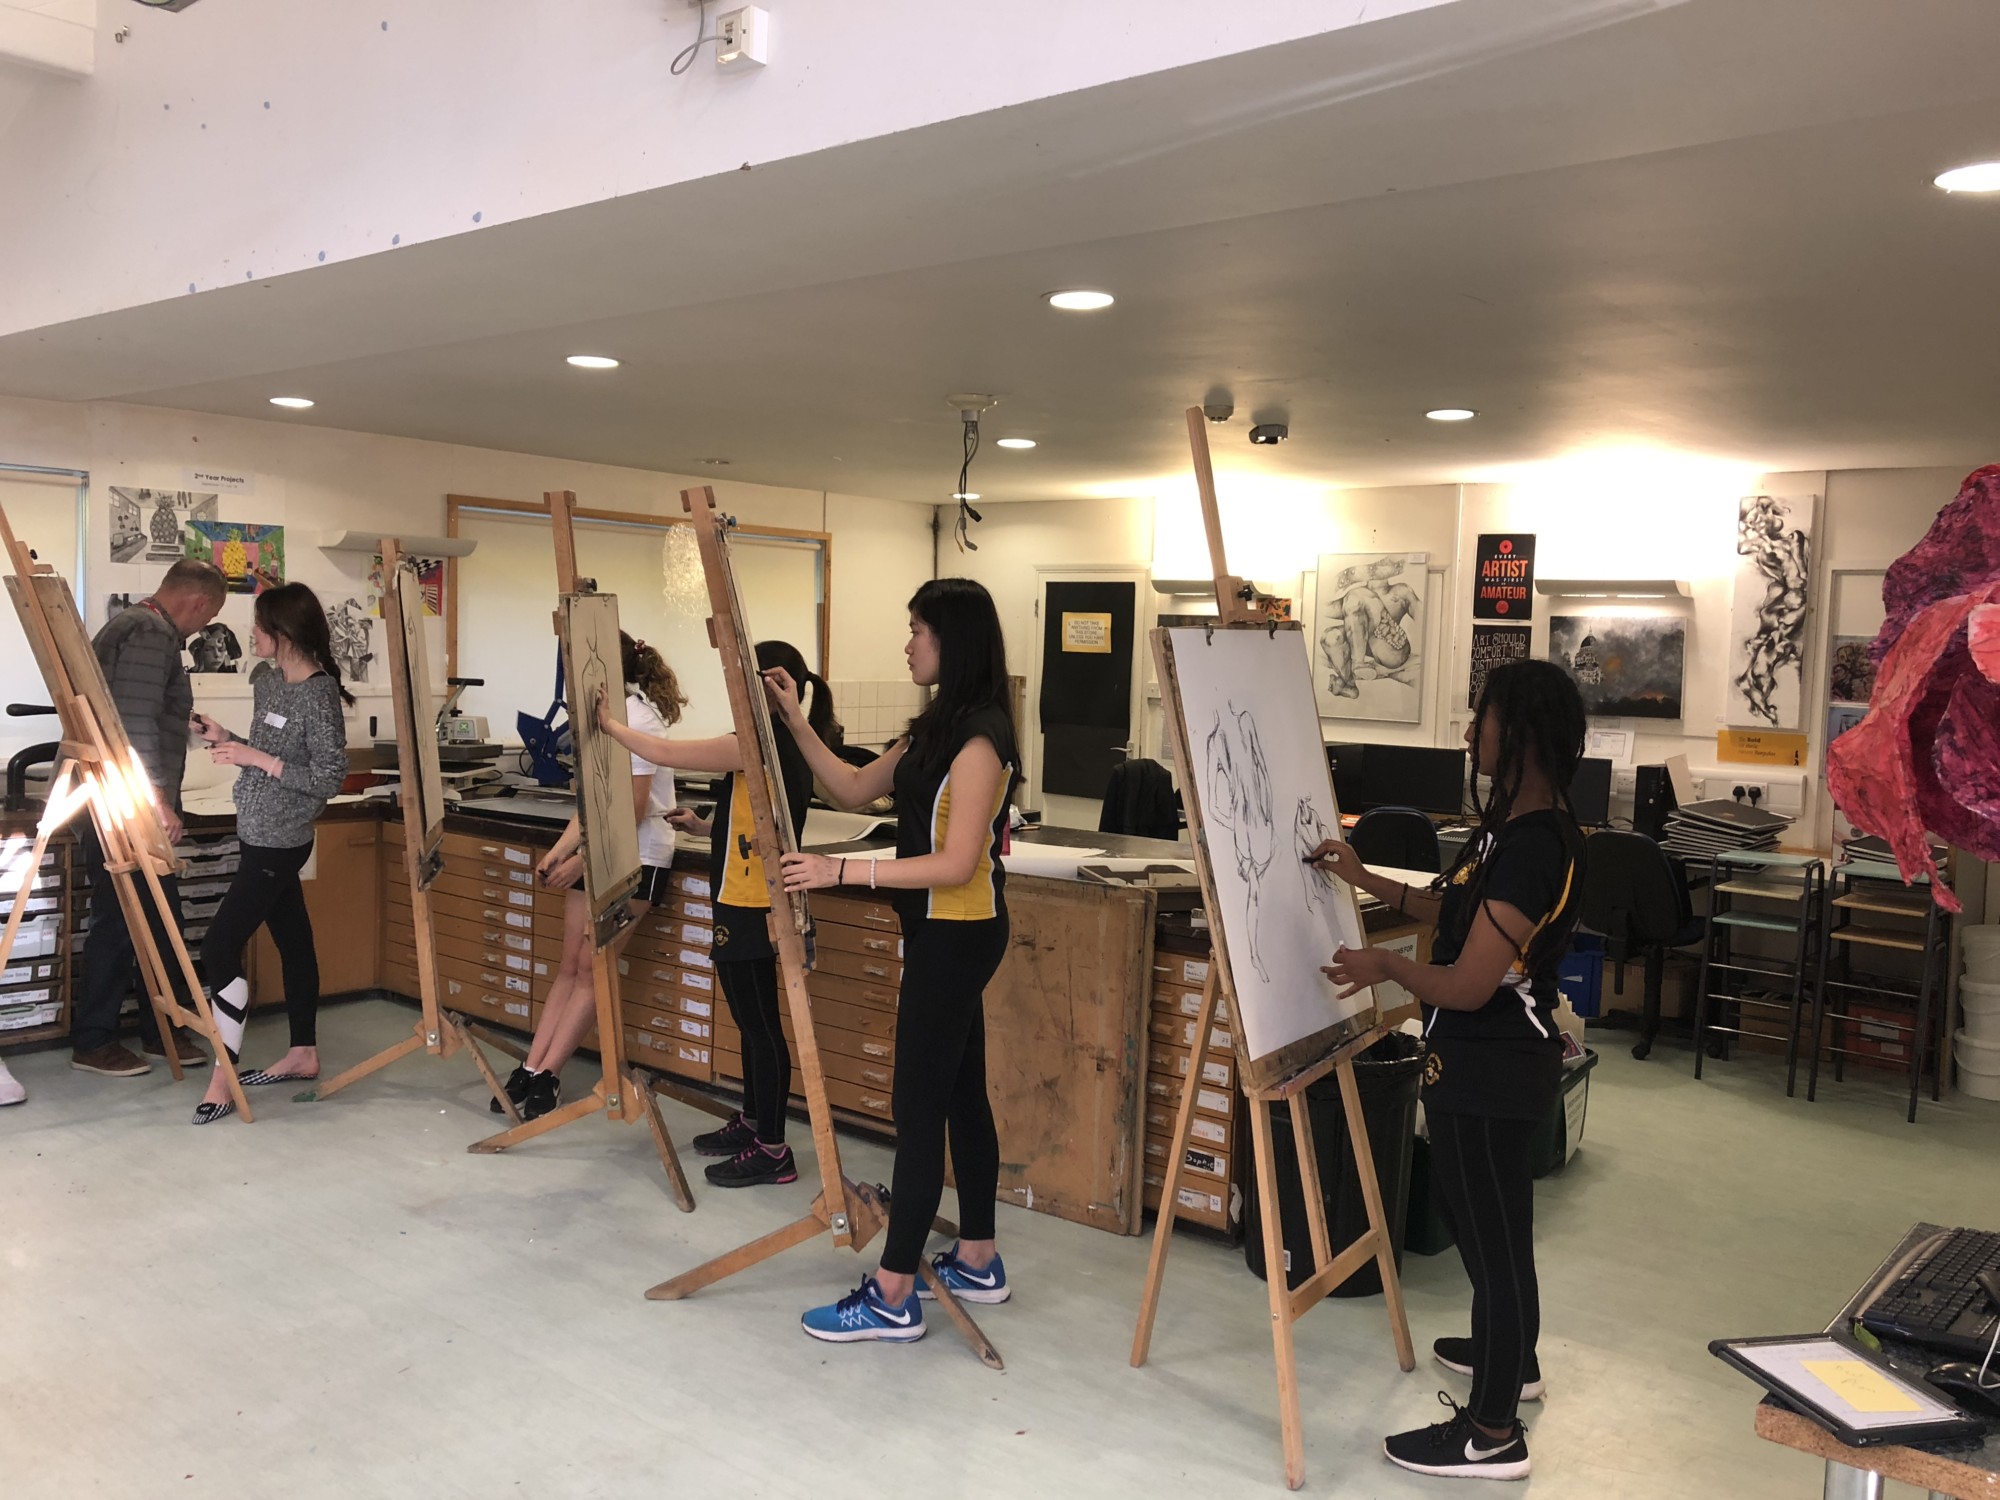 Life drawing session at Project Ability - Project Ability